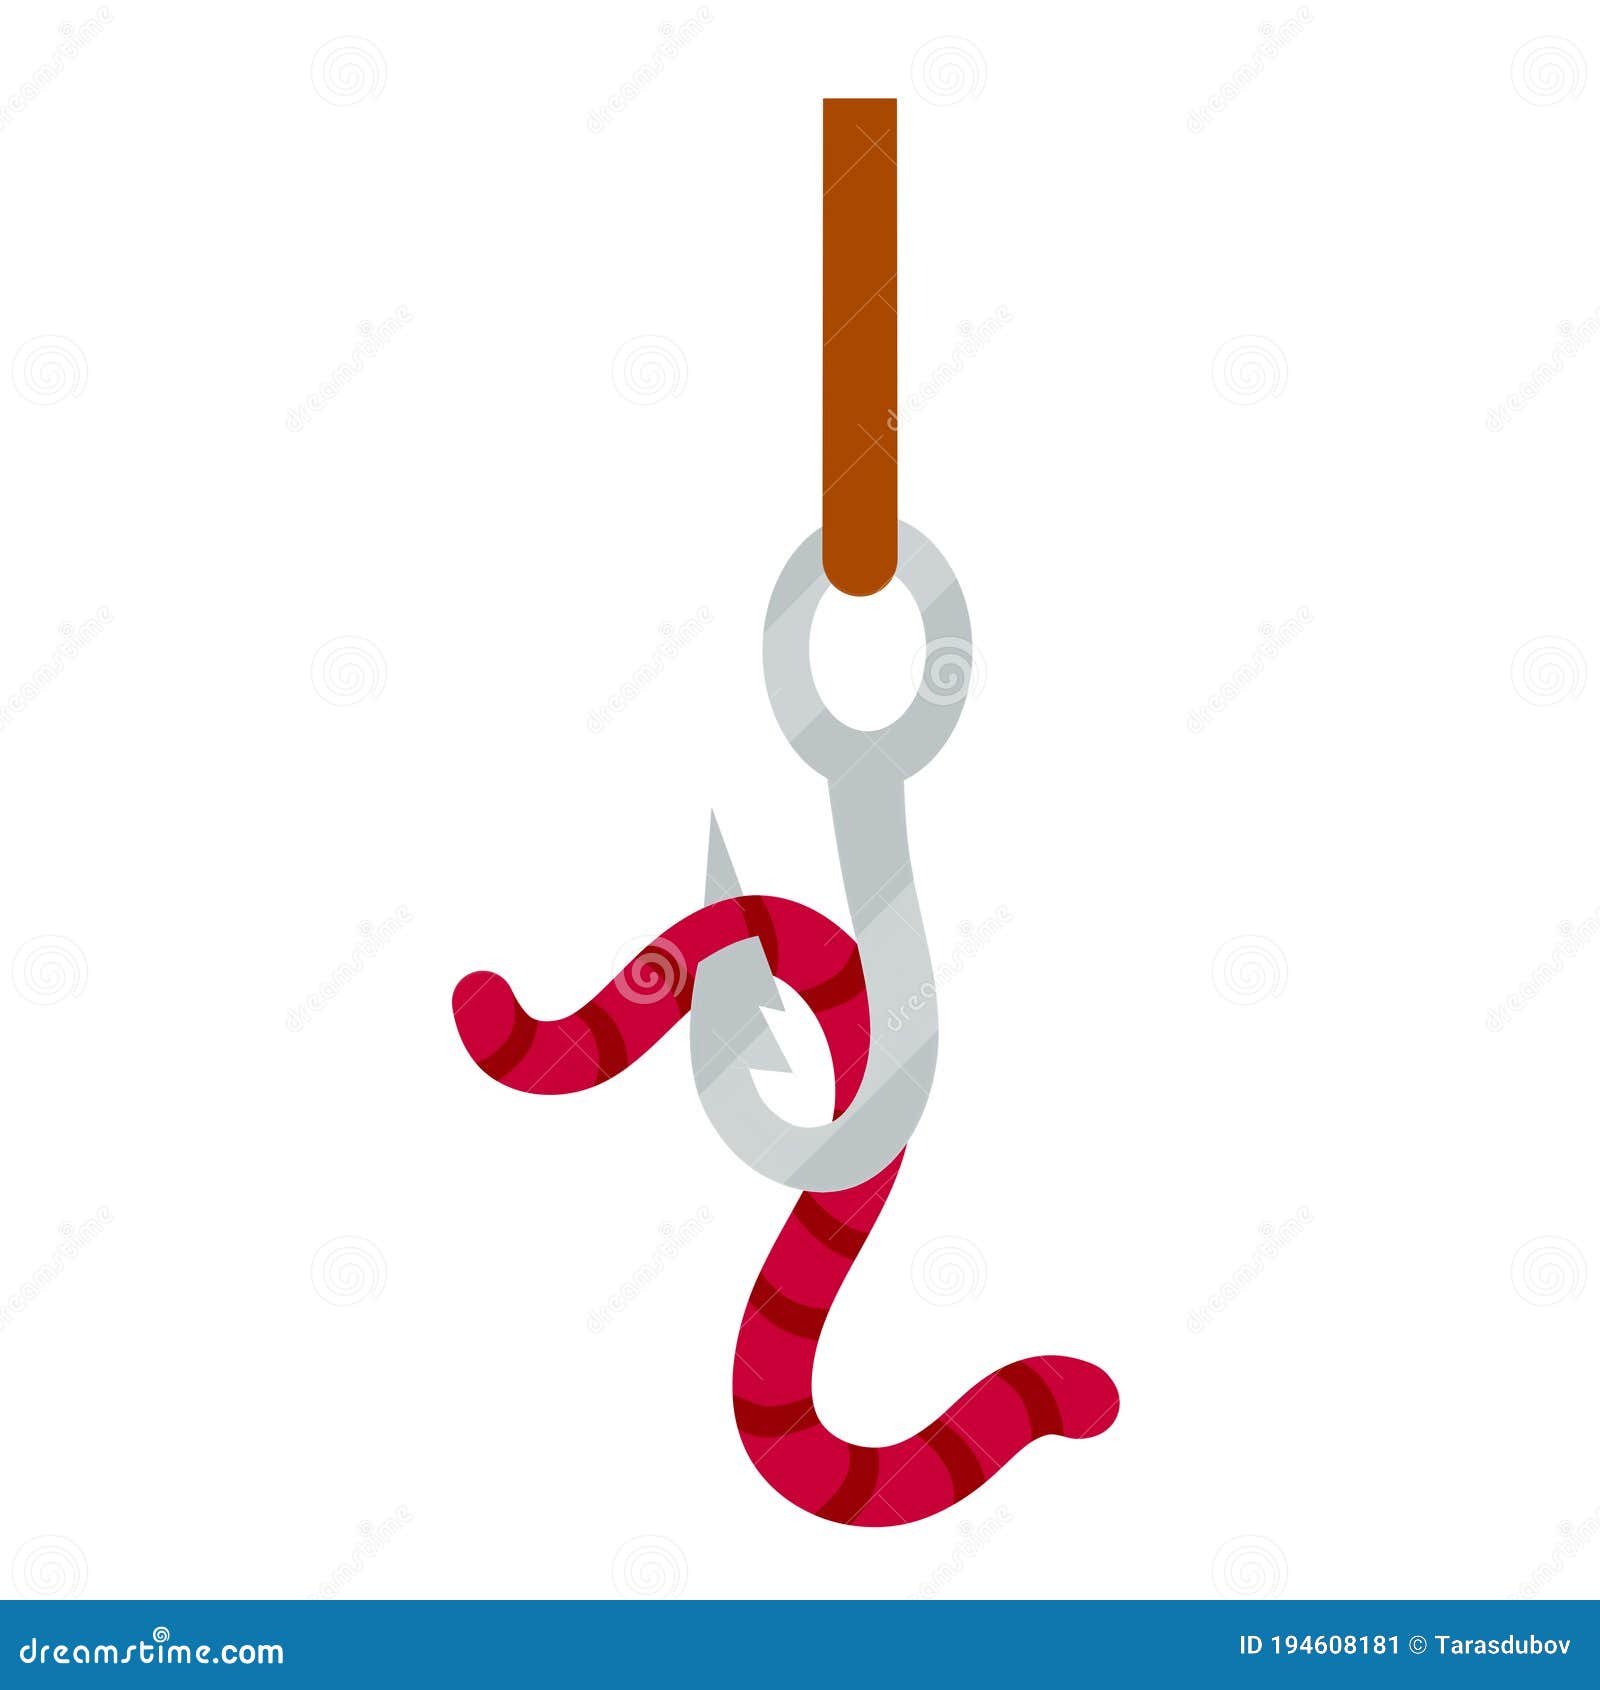 Set of Fishing Hooks and Tackle with Worm. Fishhook in Different Styles.  Element of Fishing Rod with Bait. Fish Trap Stock Vector - Illustration of  design, angler: 194608181